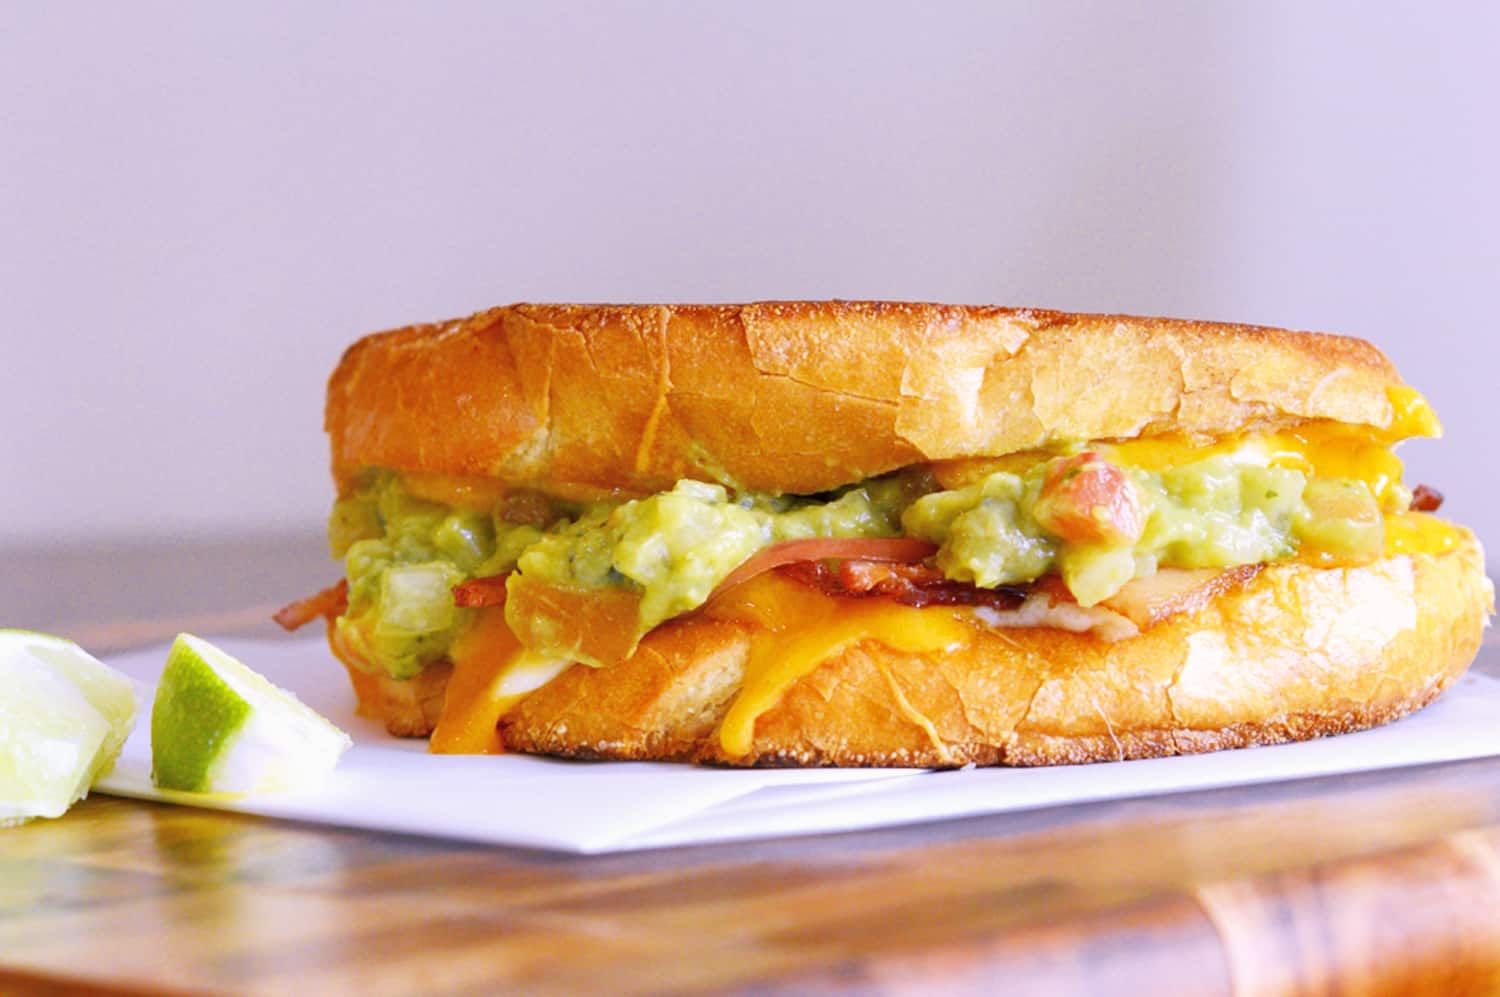 Bacon Avocado Grilled Cheese Sandwiches are made from a three cheese blend along with zesty guacamole, lime, and bacon, for out of this world sandwich experience! #howtomakegrilledcheese #gourmetgrilledcheese #avocadogrilledcheese www.savoryexperiments.com